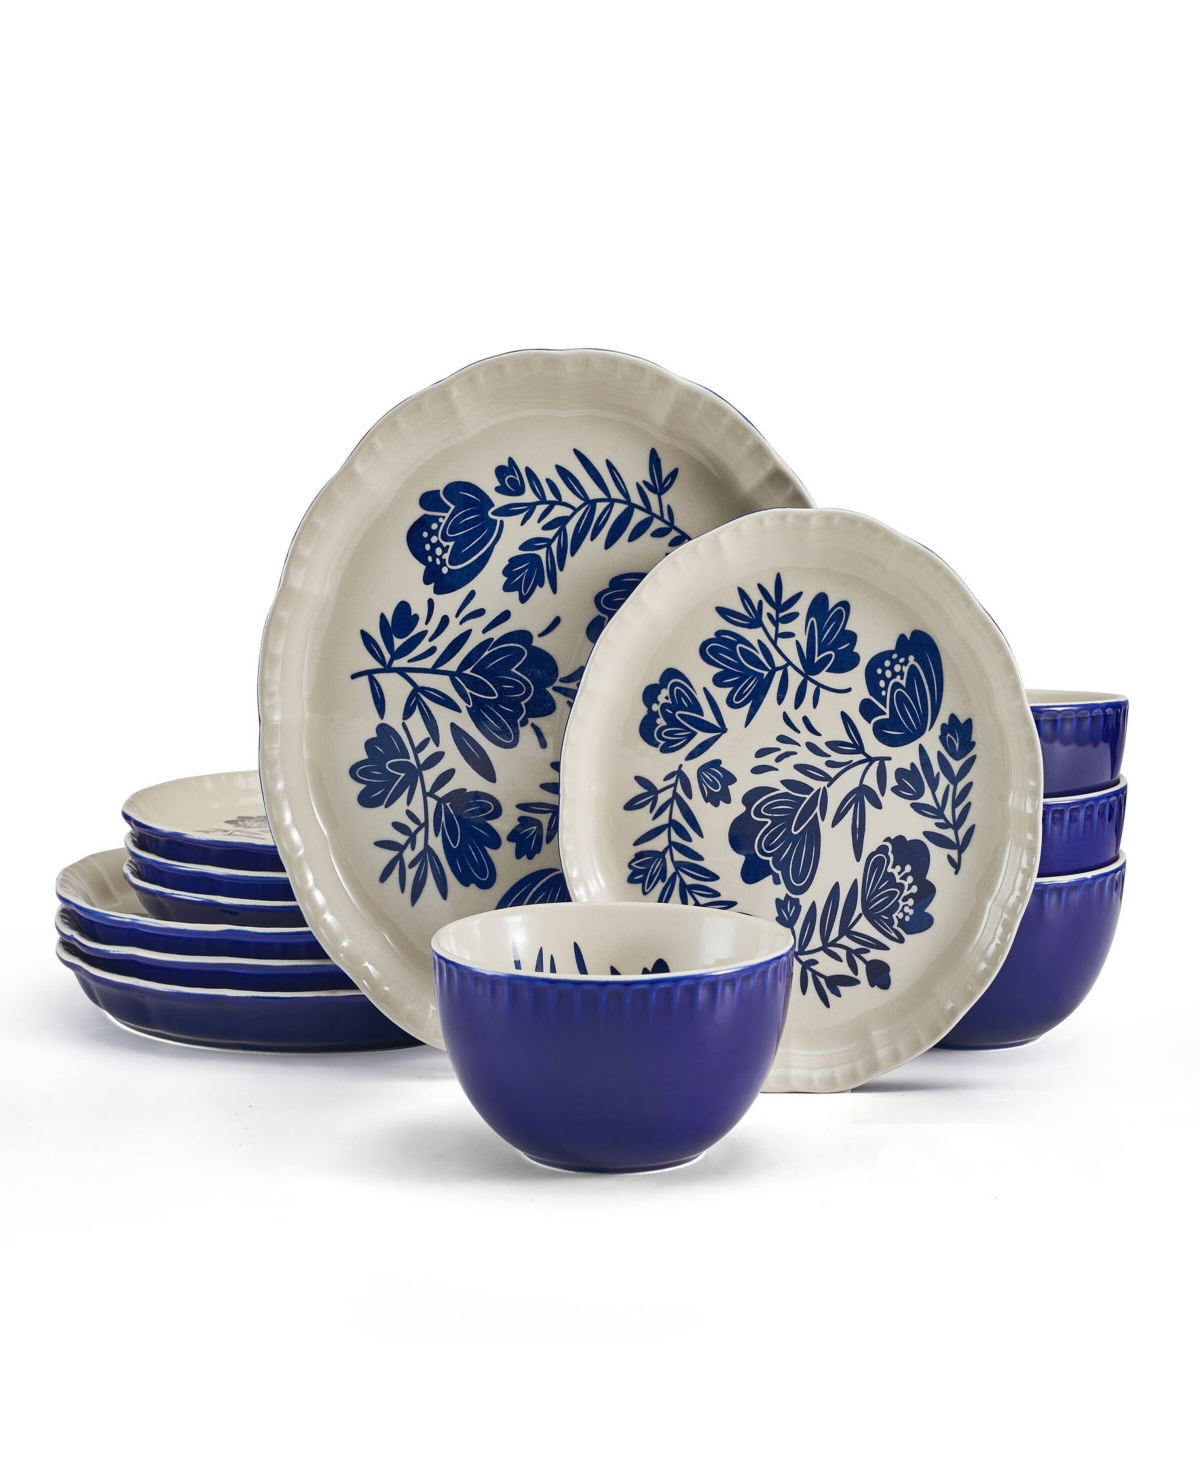 Madison 12-Pc Dinnerware Set, Service for 4 - Assorted